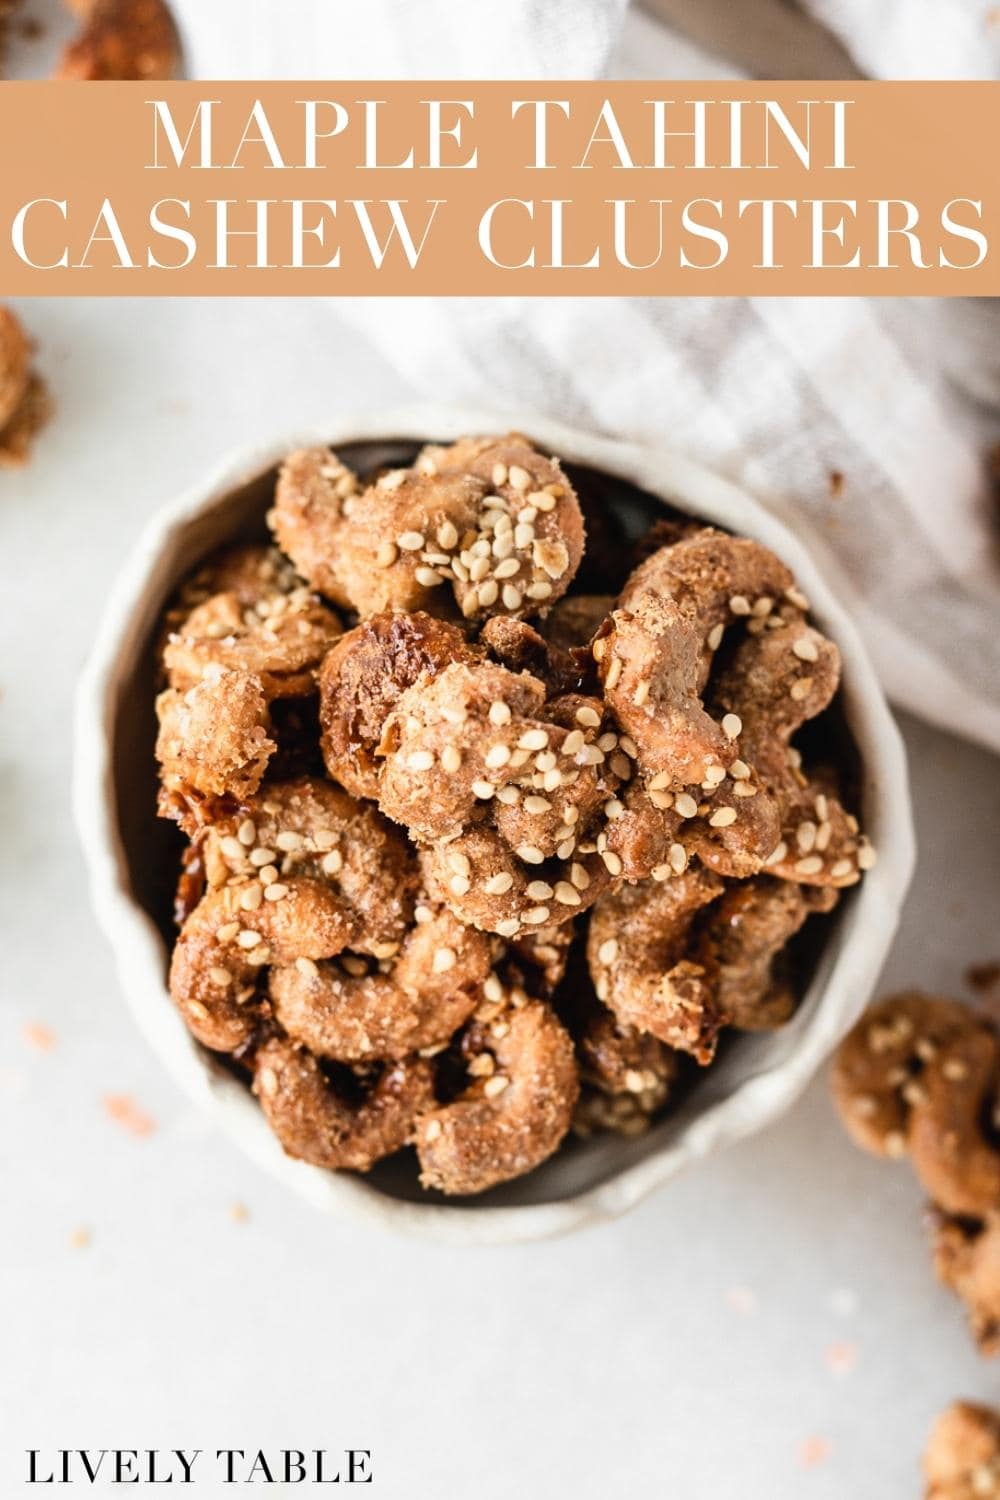 cashew clusters